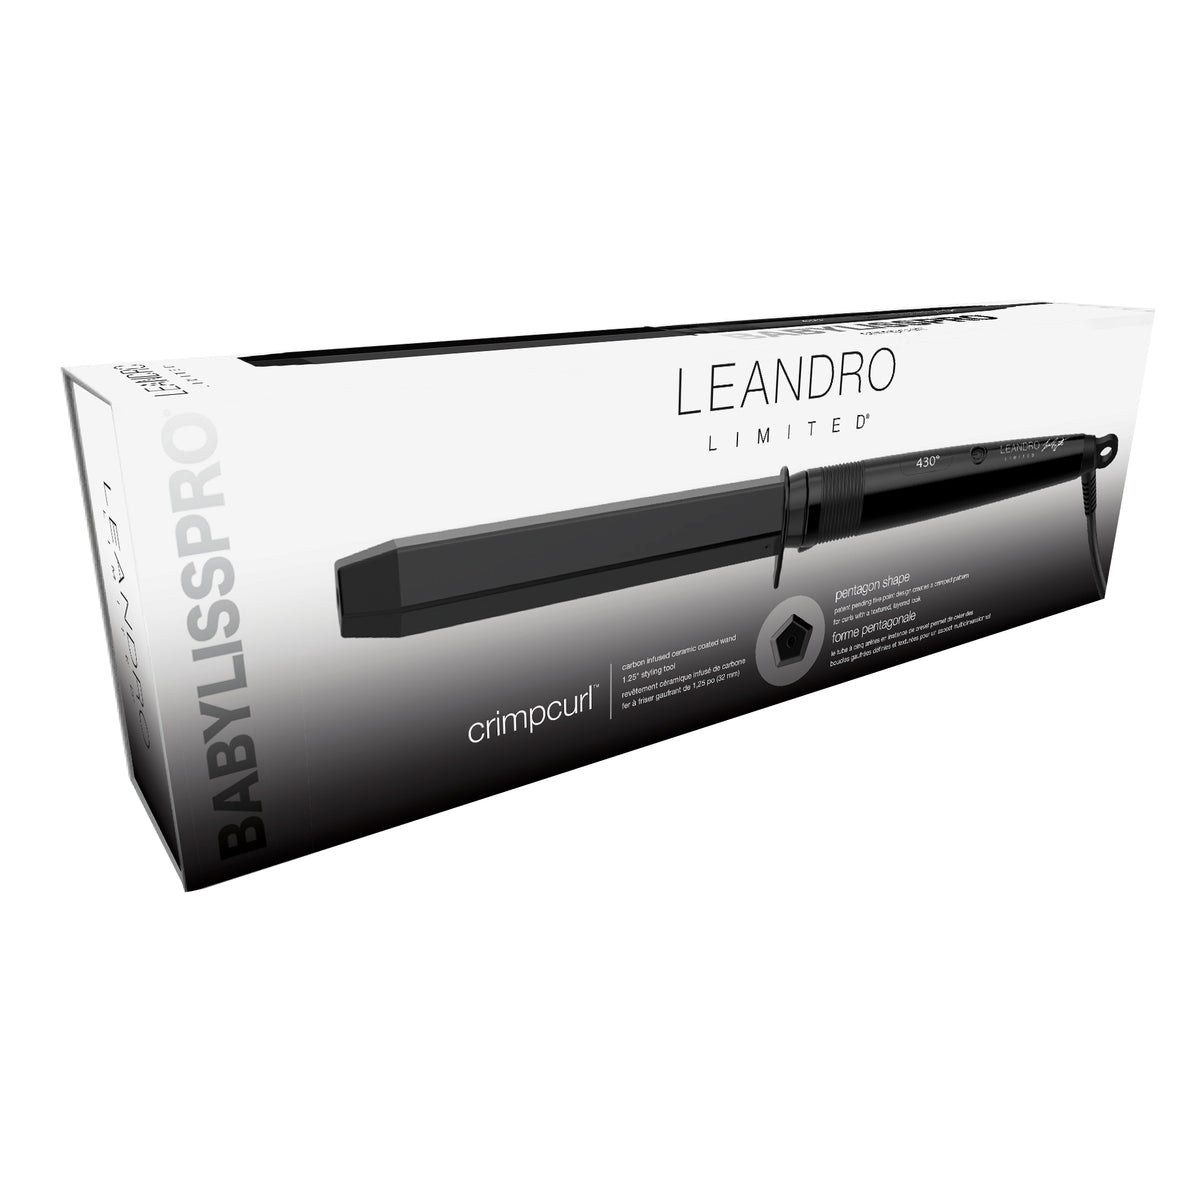 BaBylissPRO Leandro Limited Crimpcurl 1-1/4” Curling Wand